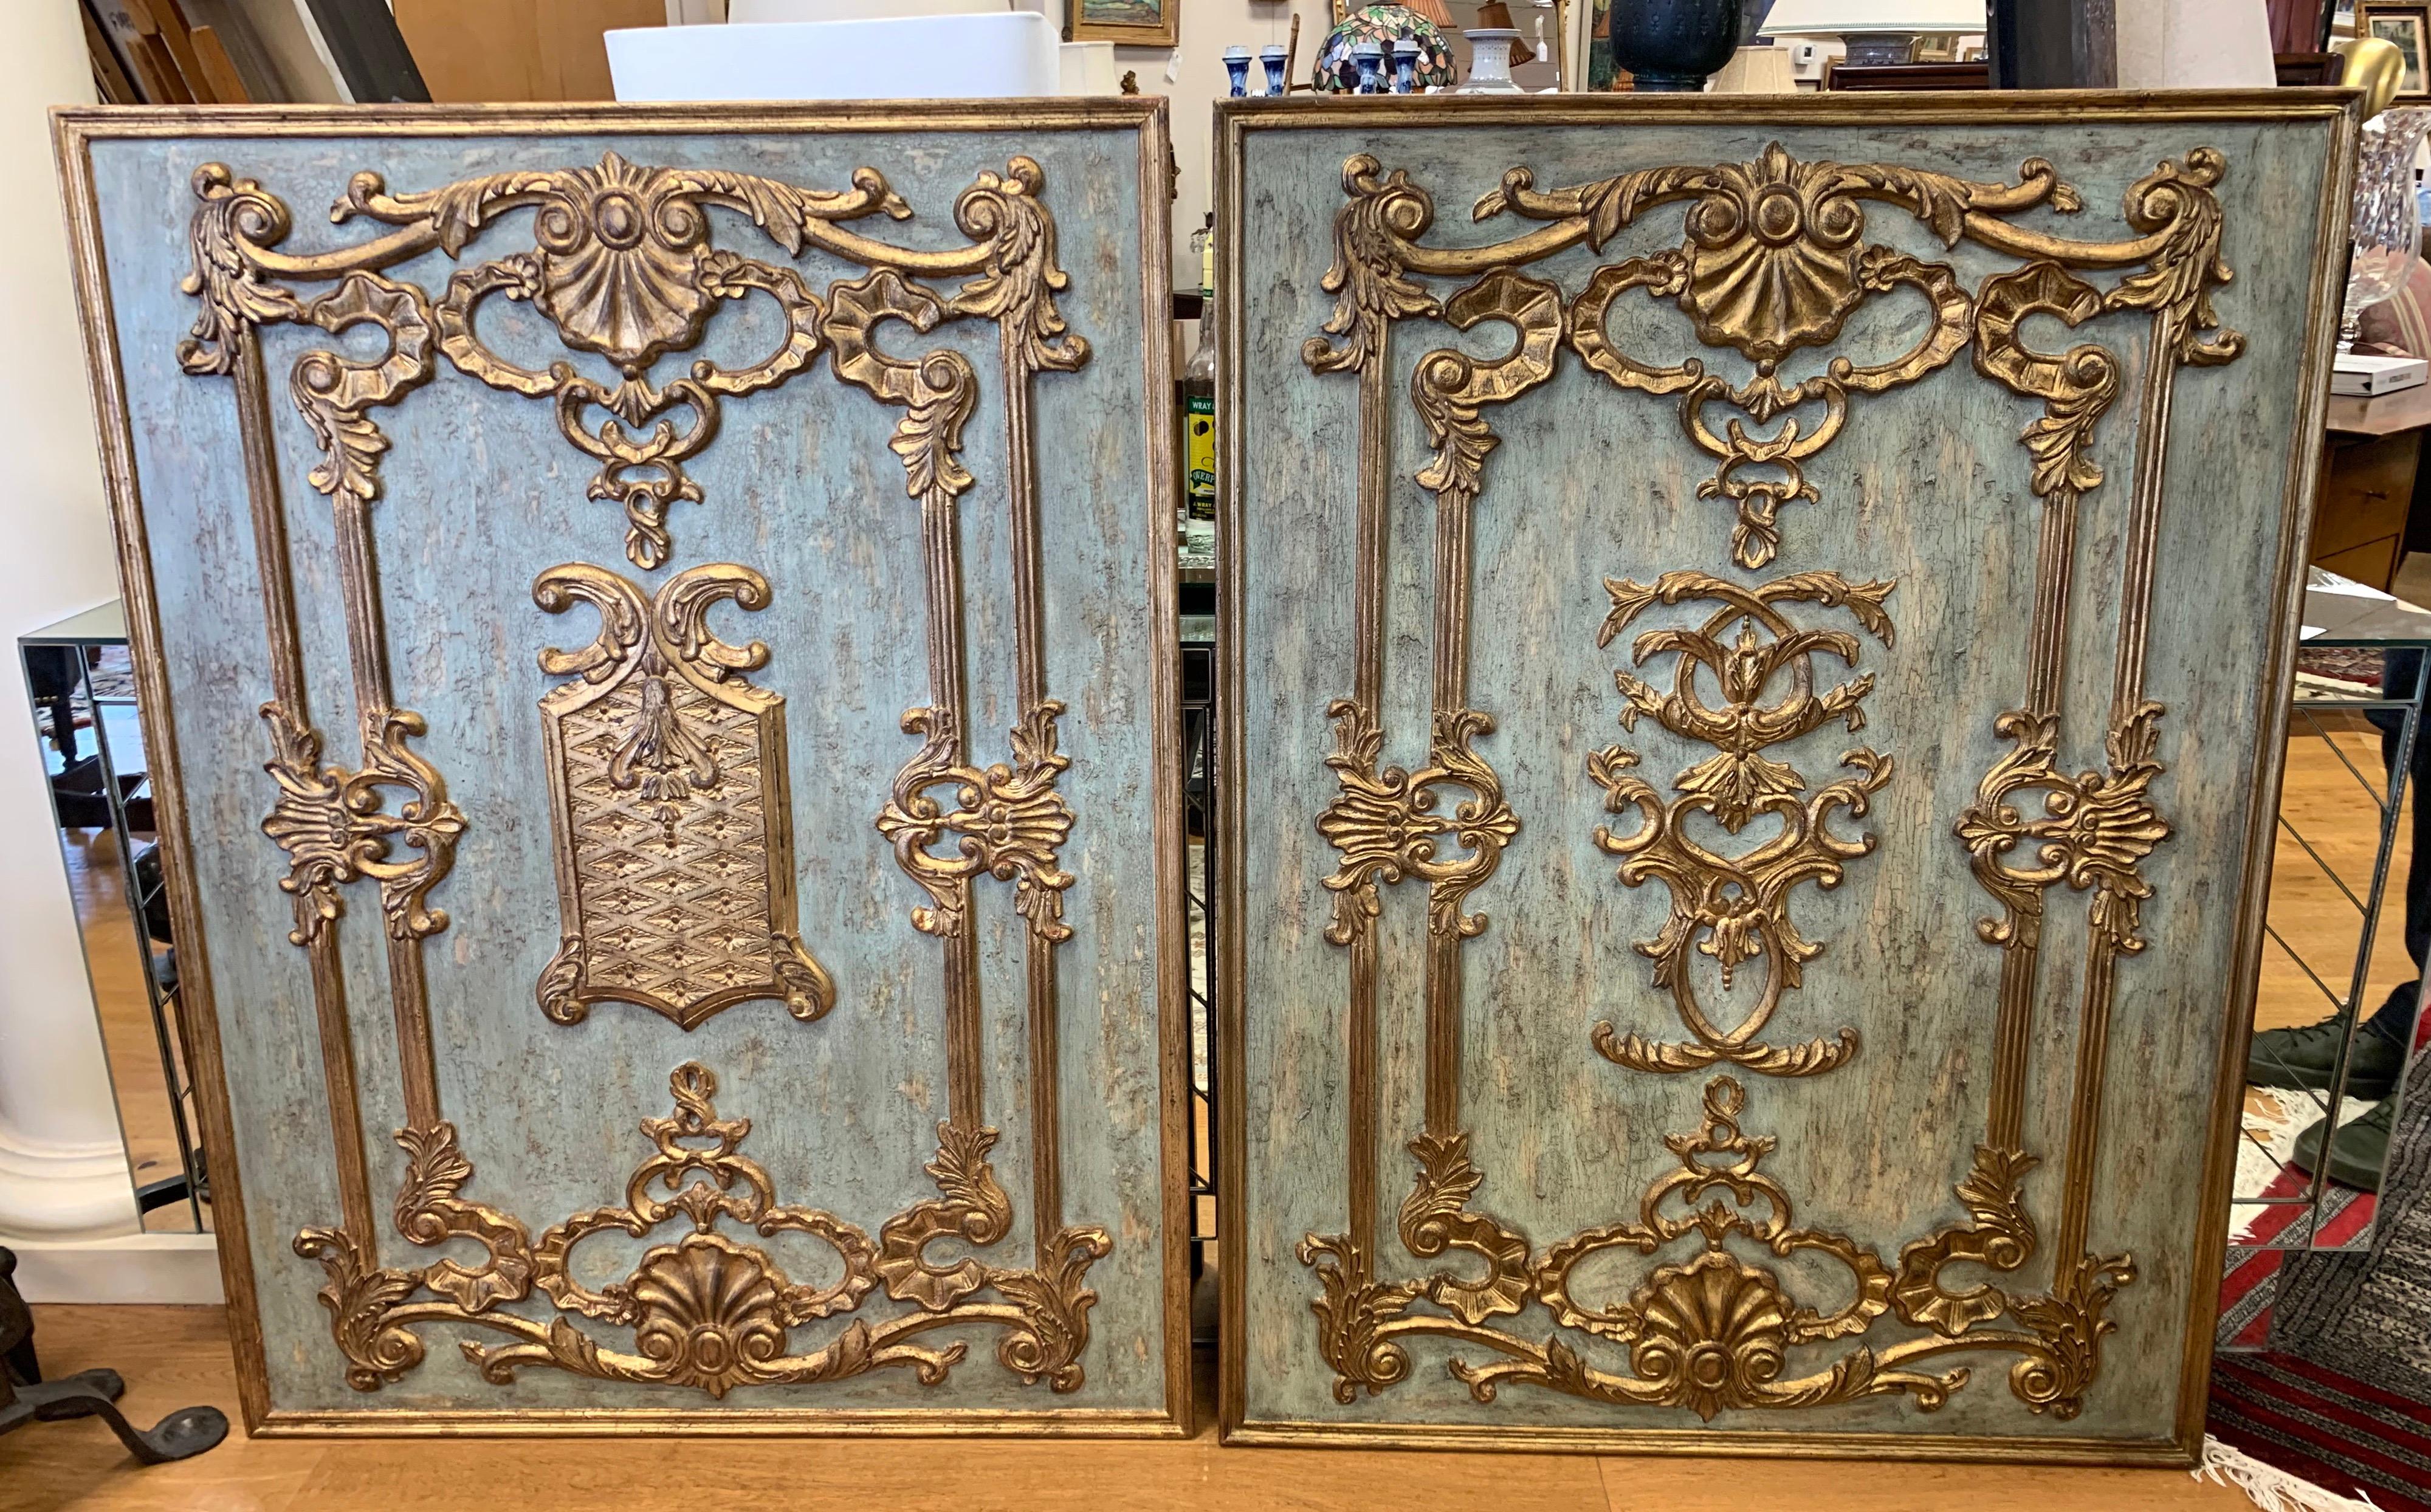 Pair of stunning Italian boiseries panels, carved wood and gilt with patinated light blue paint.